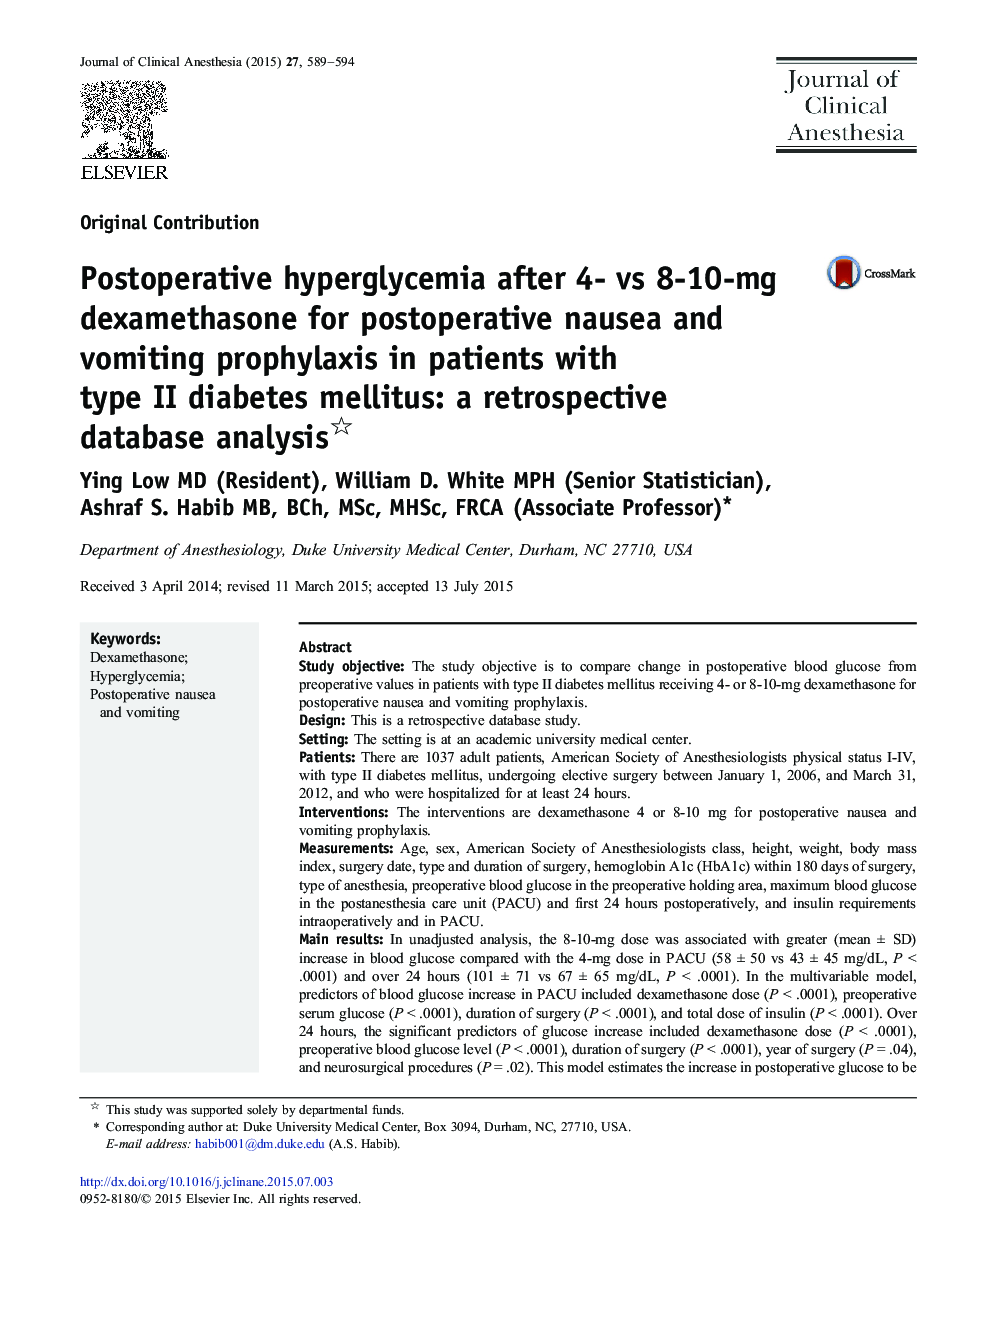 Postoperative hyperglycemia after 4- vs 8-10-mg dexamethasone for postoperative nausea and vomiting prophylaxis in patients with type II diabetes mellitus: a retrospective database analysis 